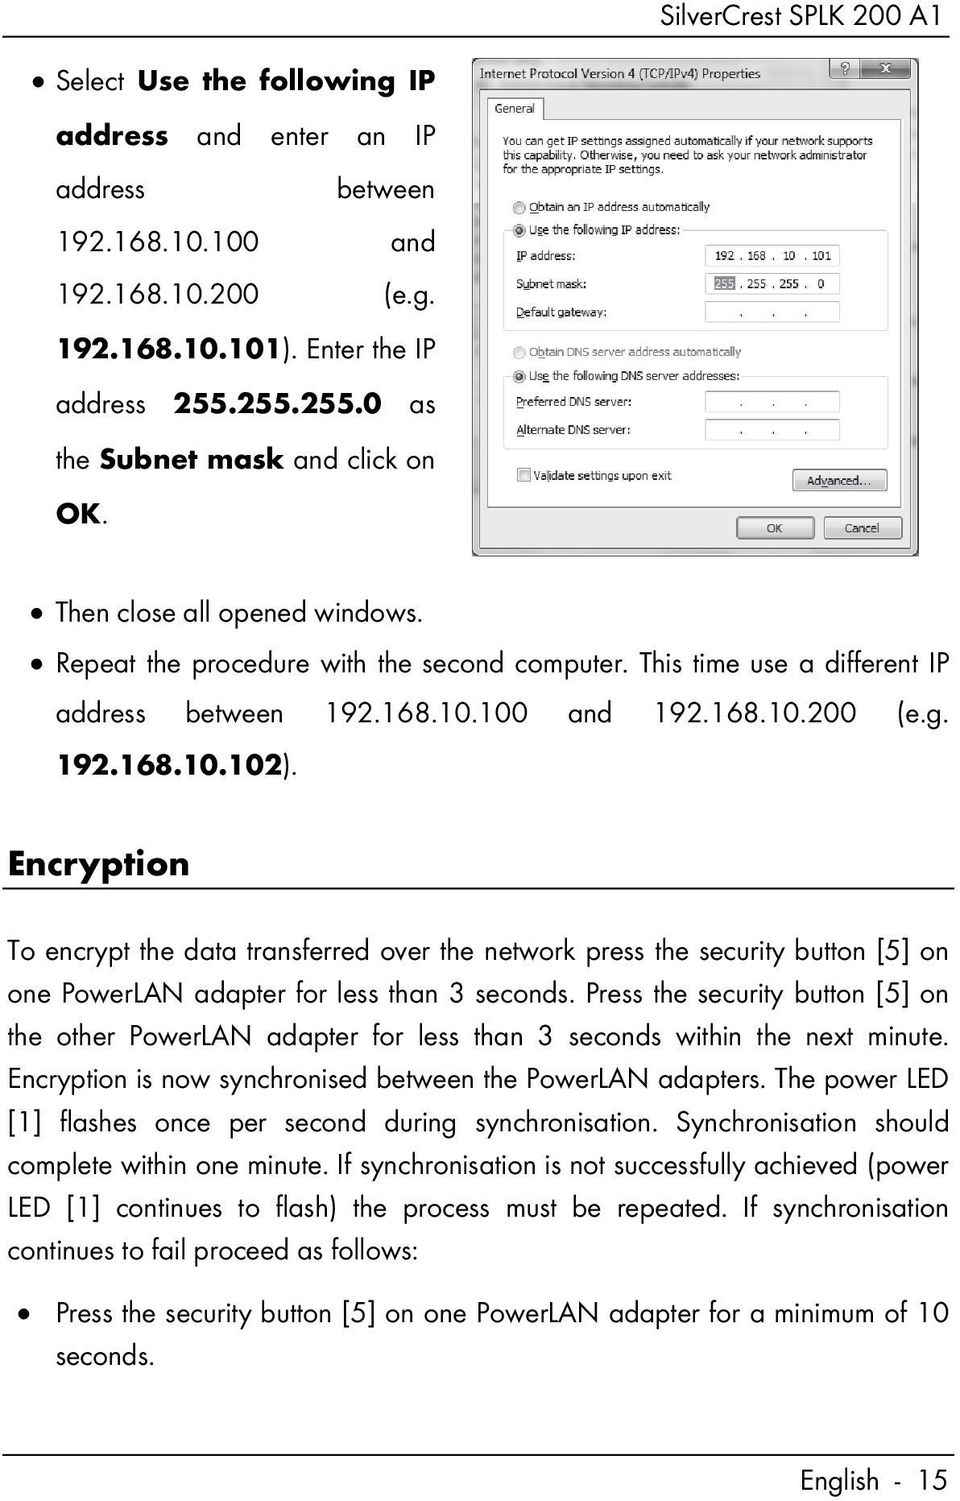 Encryption To encrypt the data transferred over the network press the security button [5] on one PowerLAN adapter for less than 3 seconds.